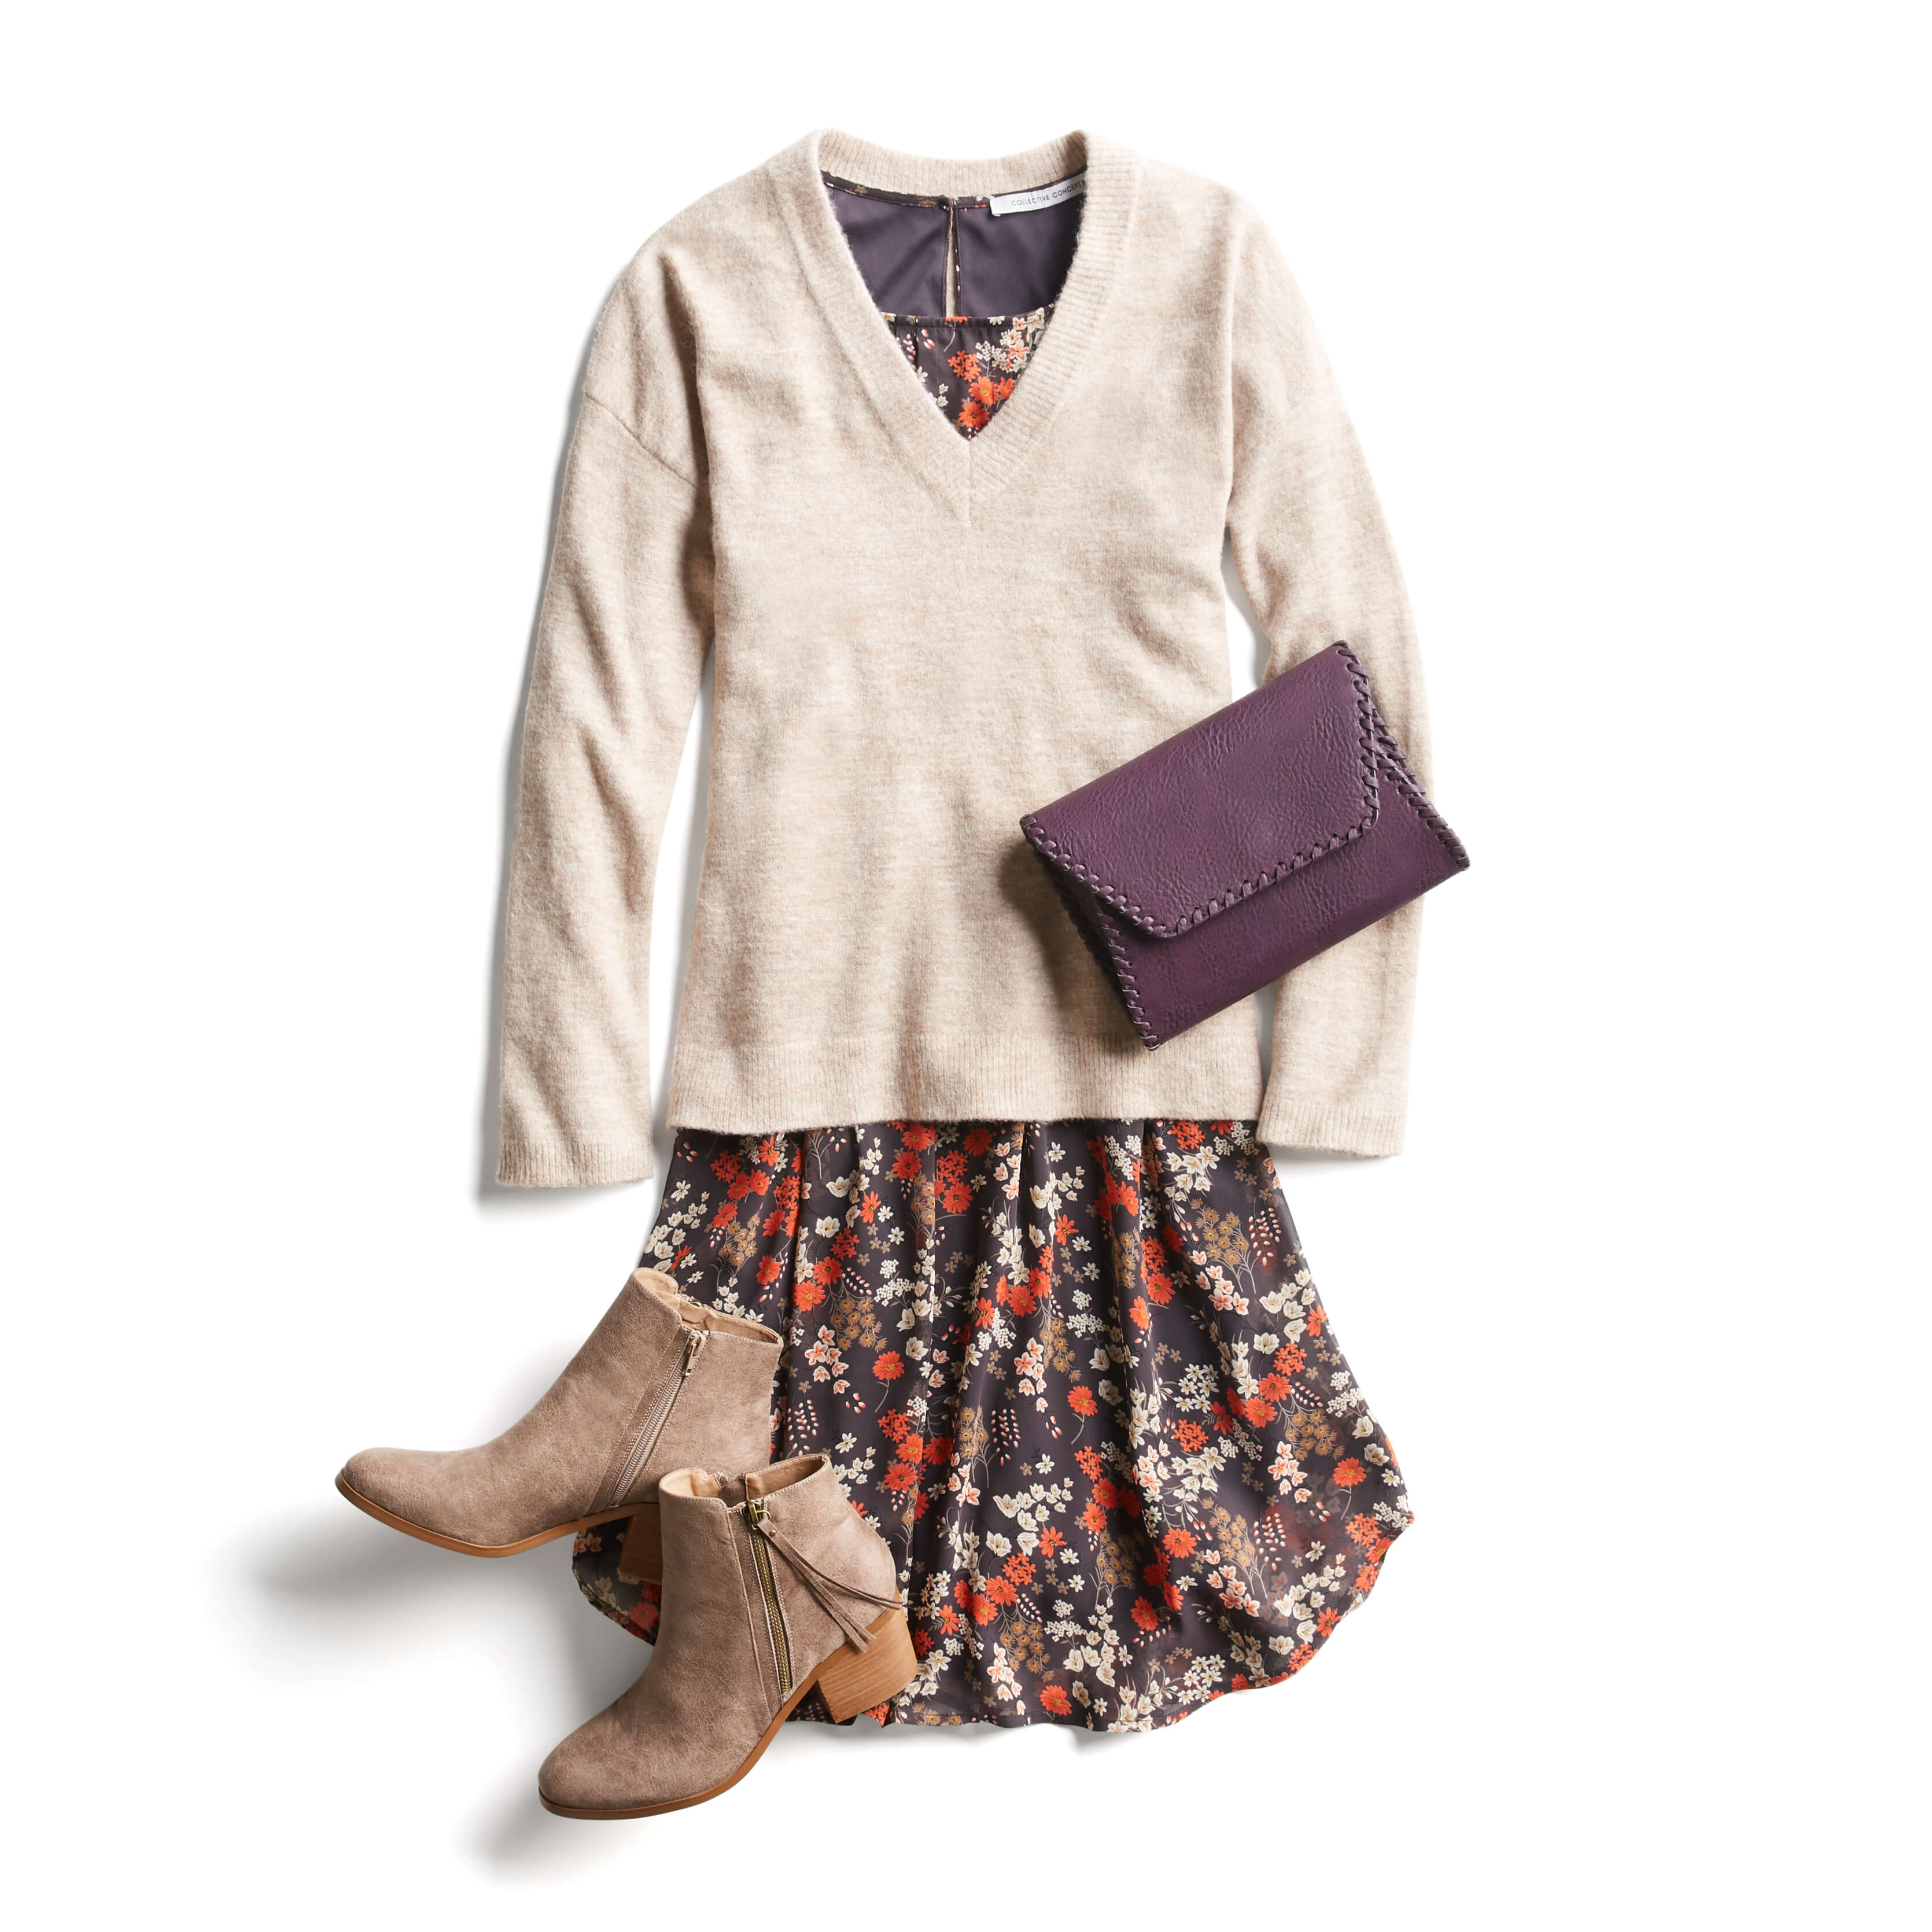 Layer sweater over dress with boots